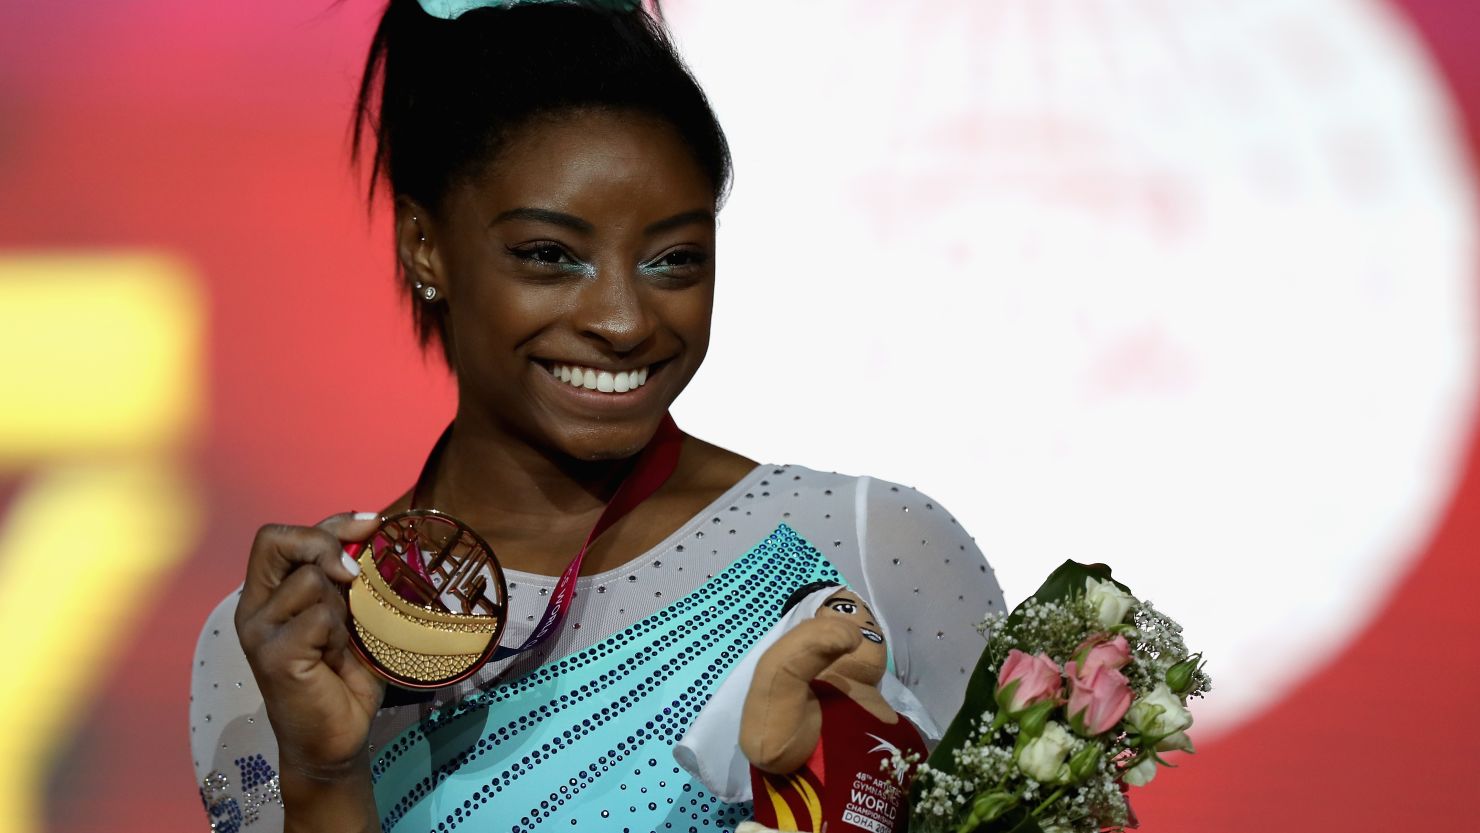 Despite falling in her vault, falling in her balance beam routine and stepping out of bounds on the floor exercise, Simone Biles won her fourth world championships all-around title.